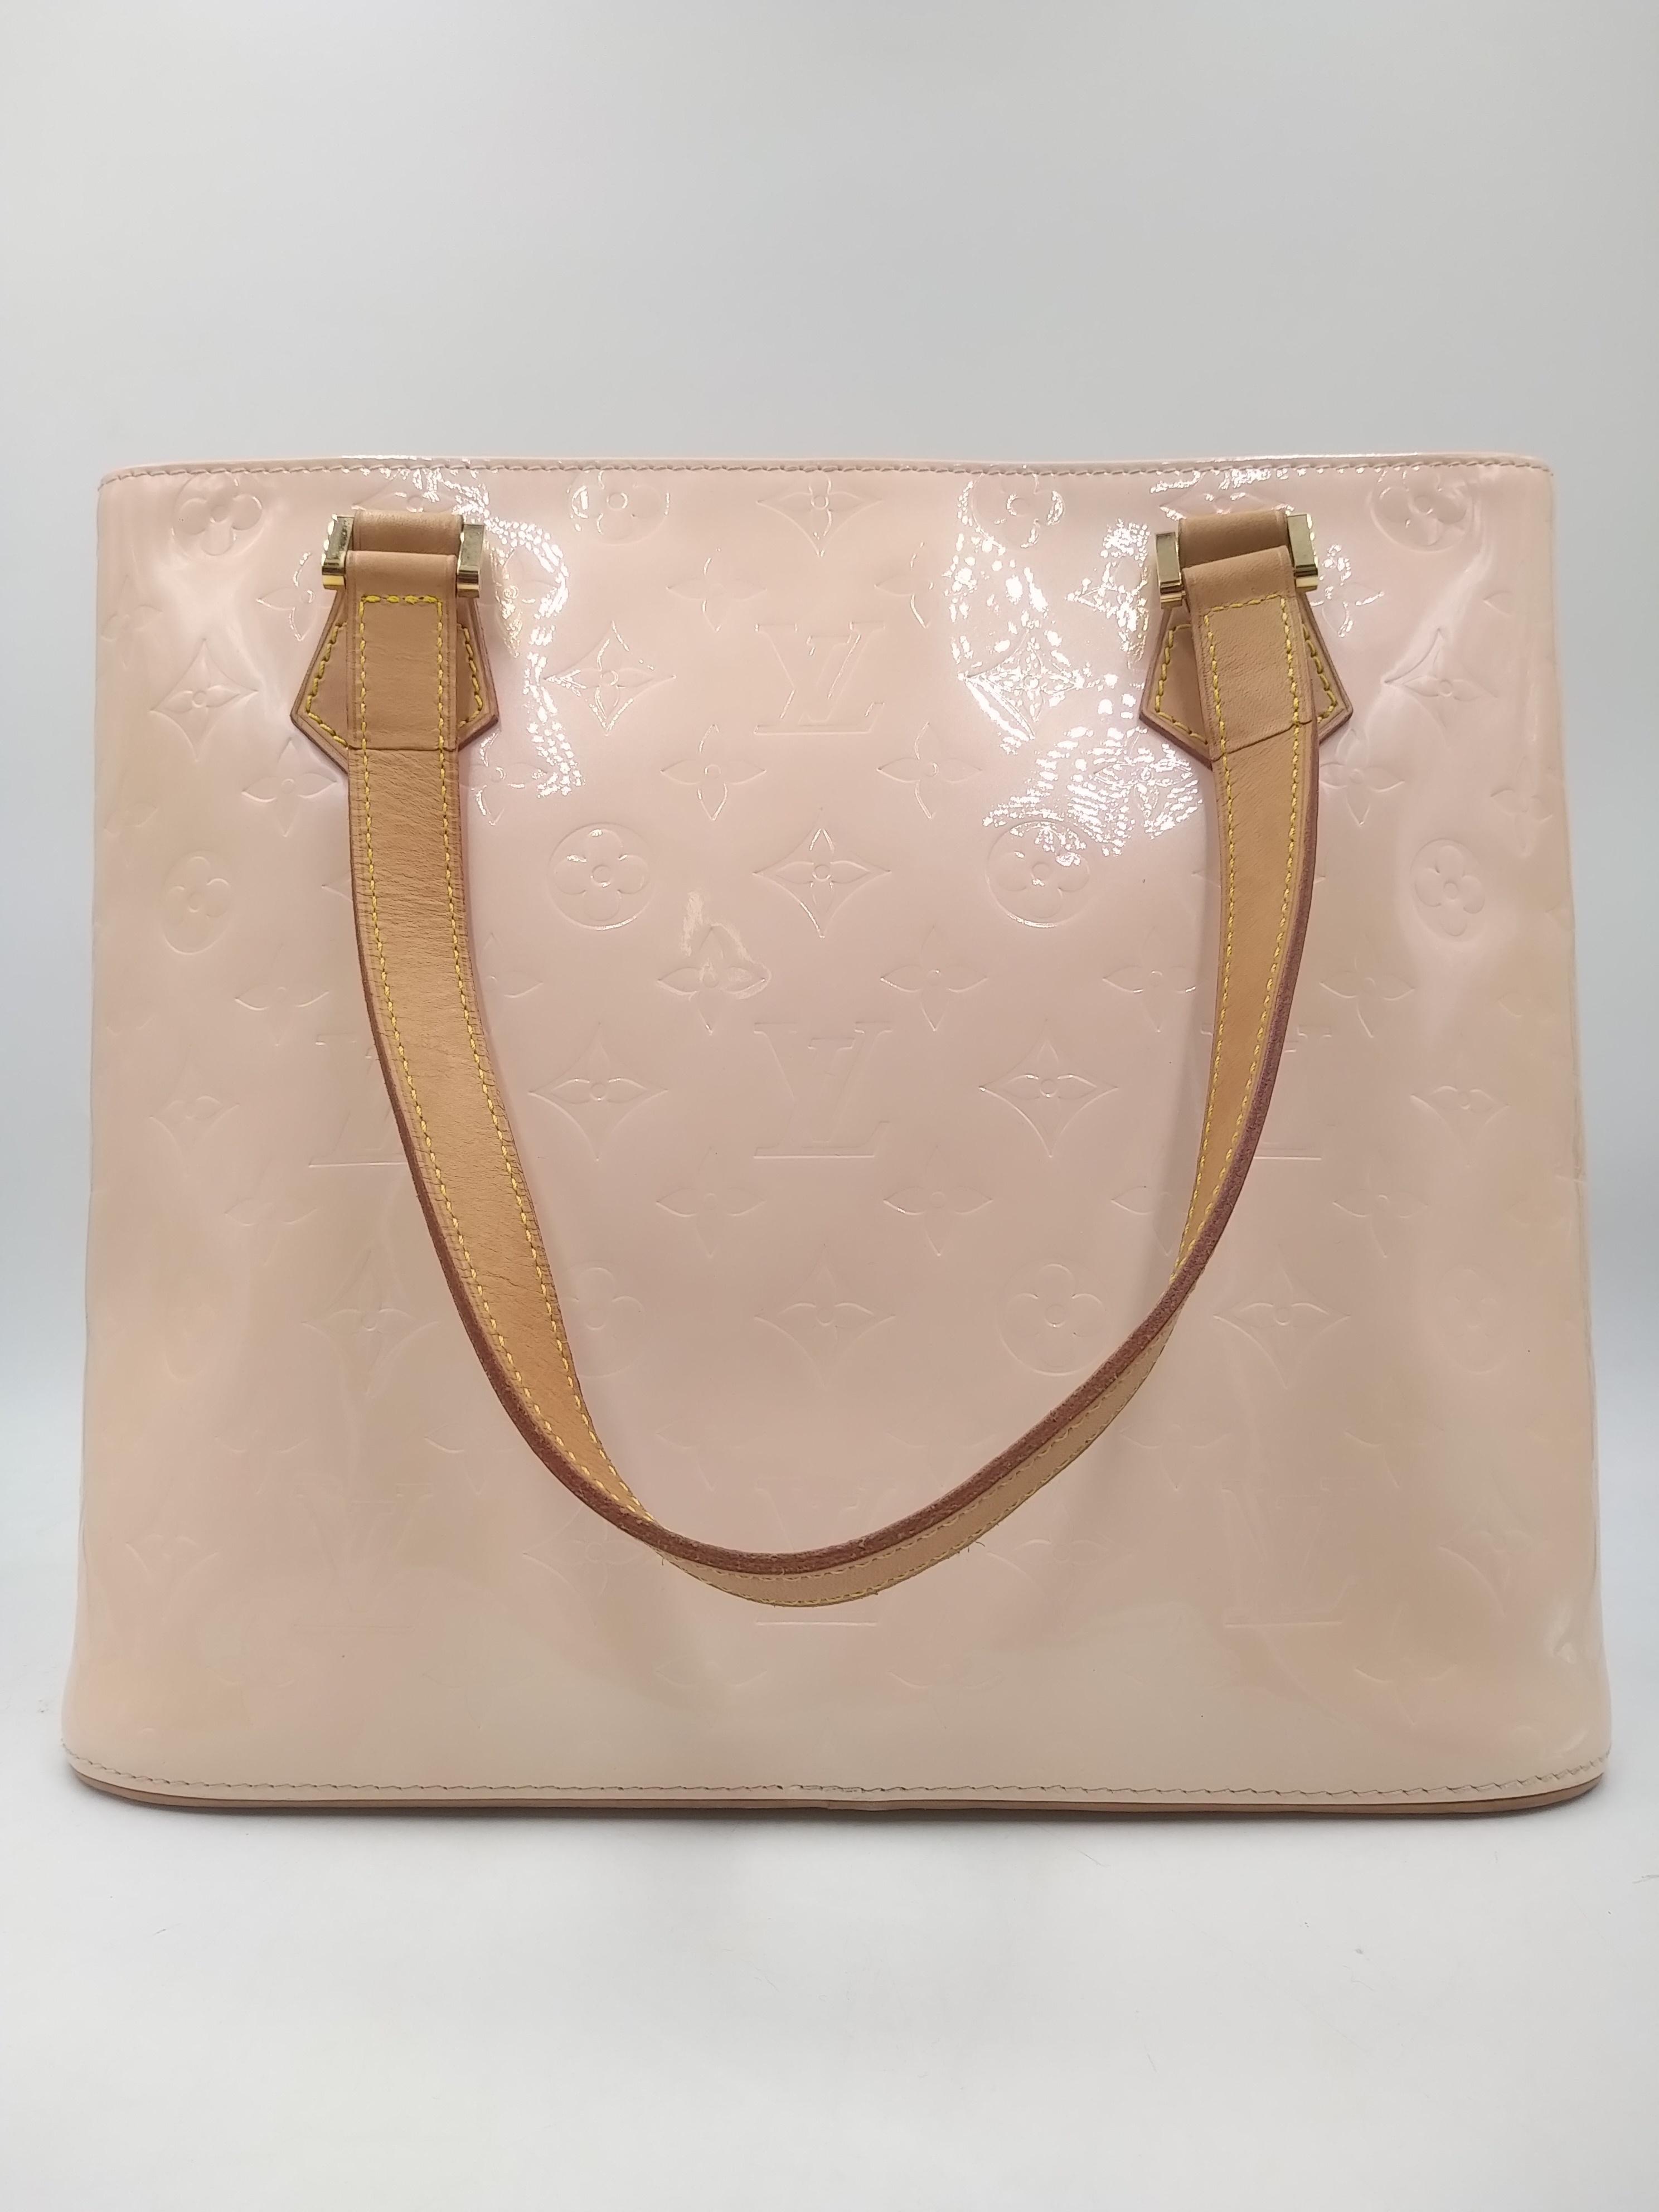 Louis Vuitton Baby Pink Monogram Vernis Houston Bag, 2004
-100% authentic Louis Vuitton
- Pale pink monogram embossed coated leather with natural cowhide trim
- Double flat natural cowhide handles
- Single zip closure
- Leather inside
- One zip